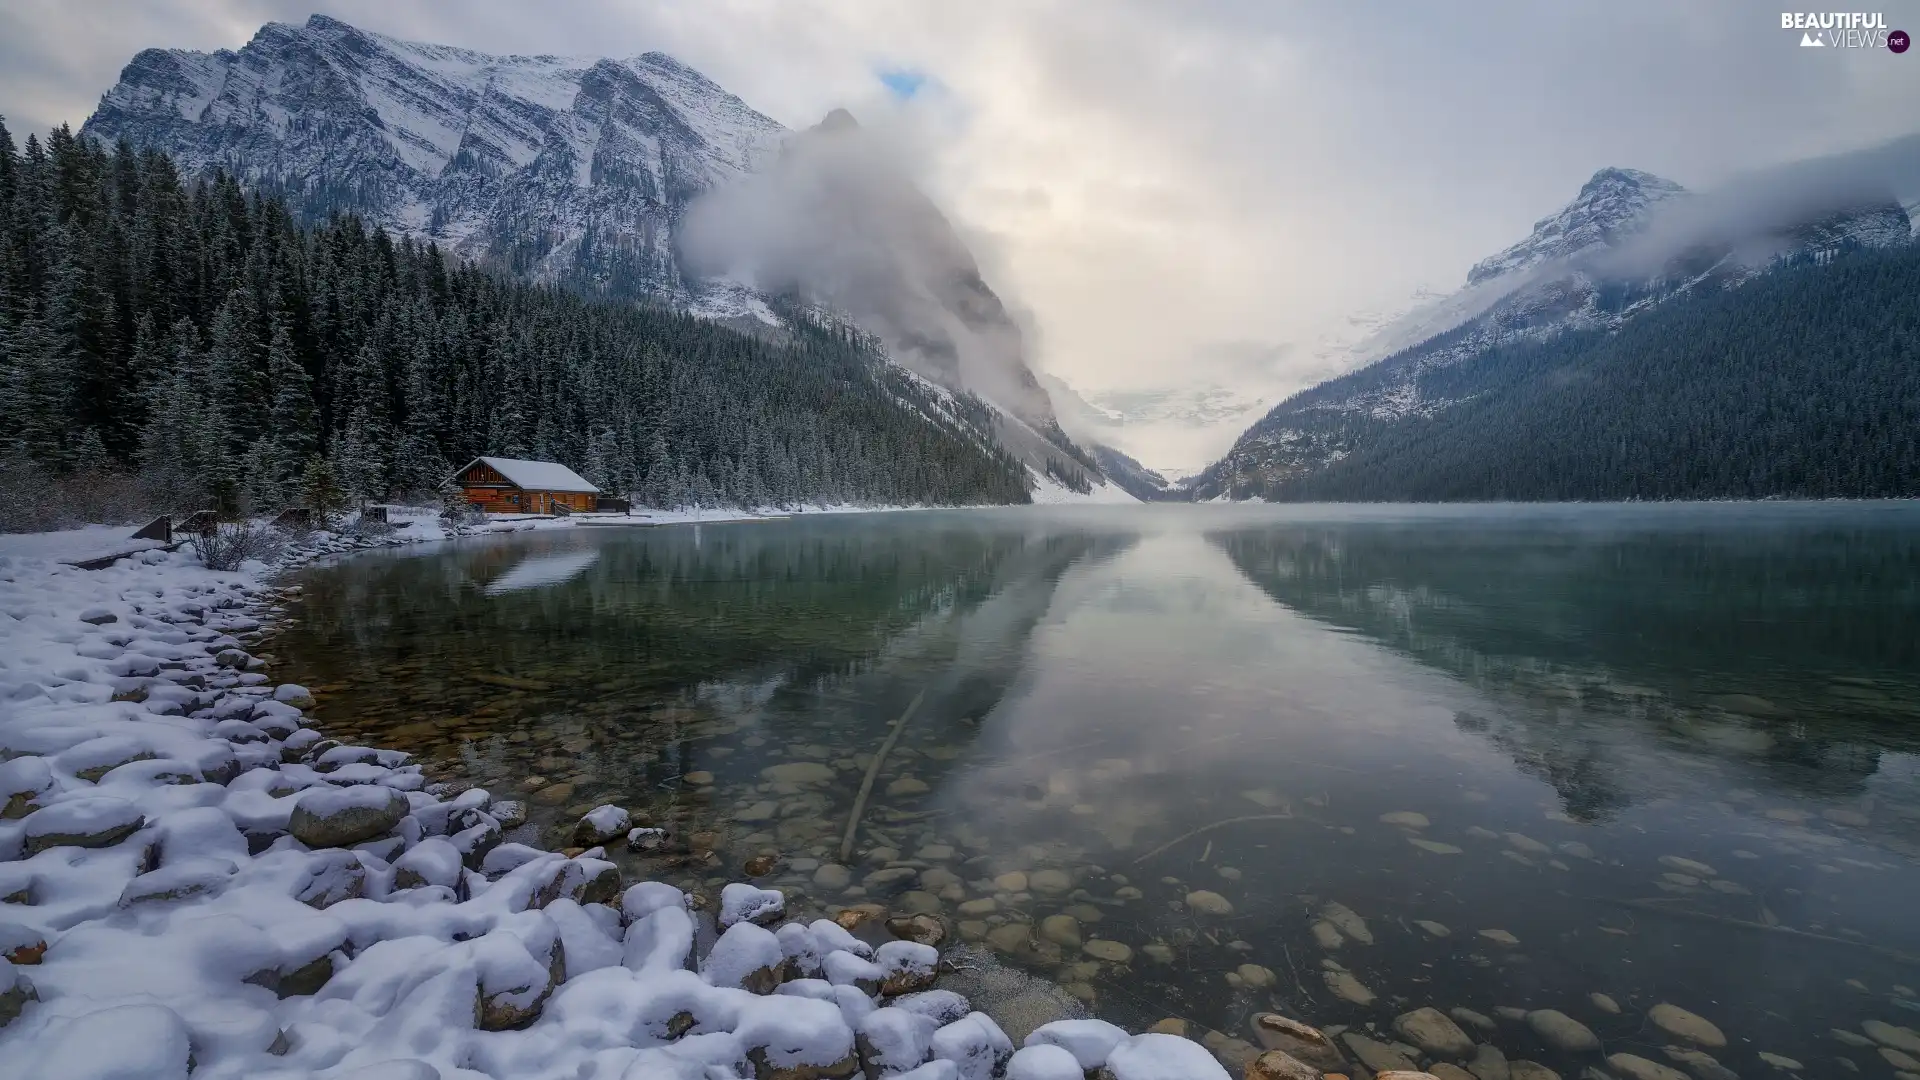 Mountains, forest, Canada, winter, Home, Lake Louise, Banff National Park, Stones